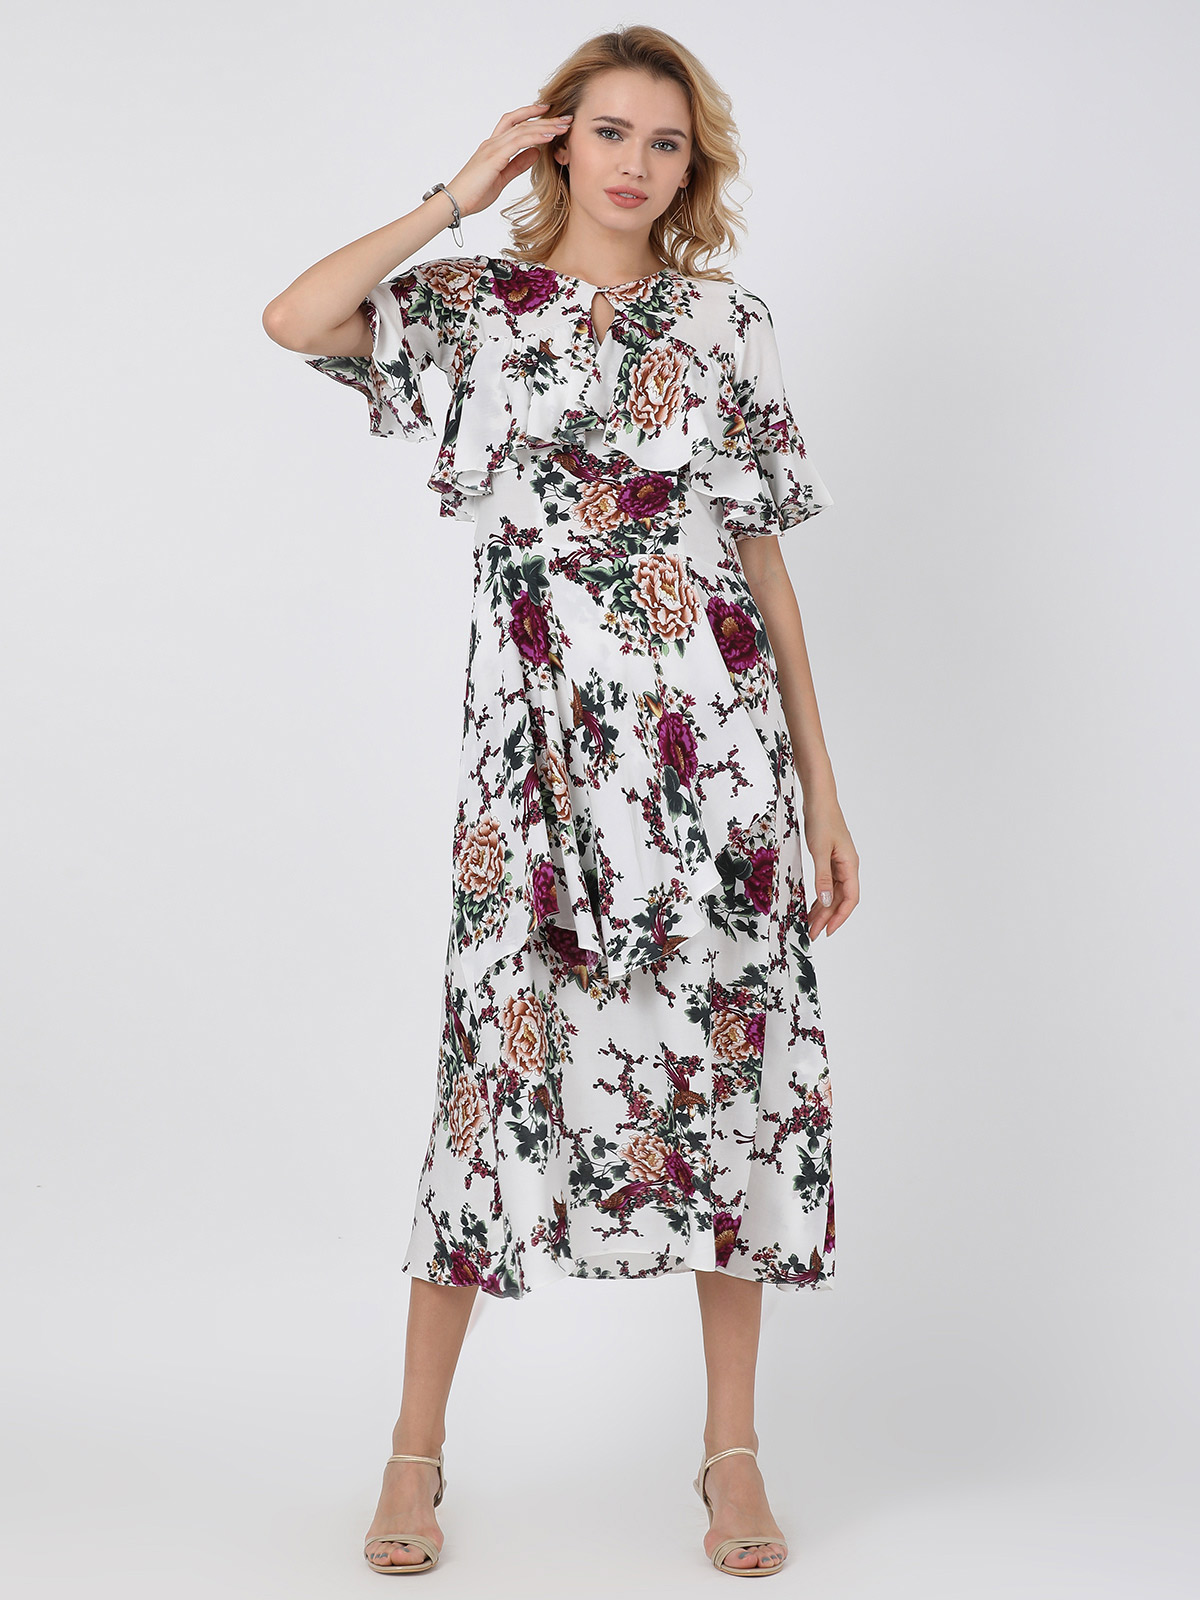 White Floral Printed Multi Frilled & Flared Keyhole Neck Bell Sleeve Dress